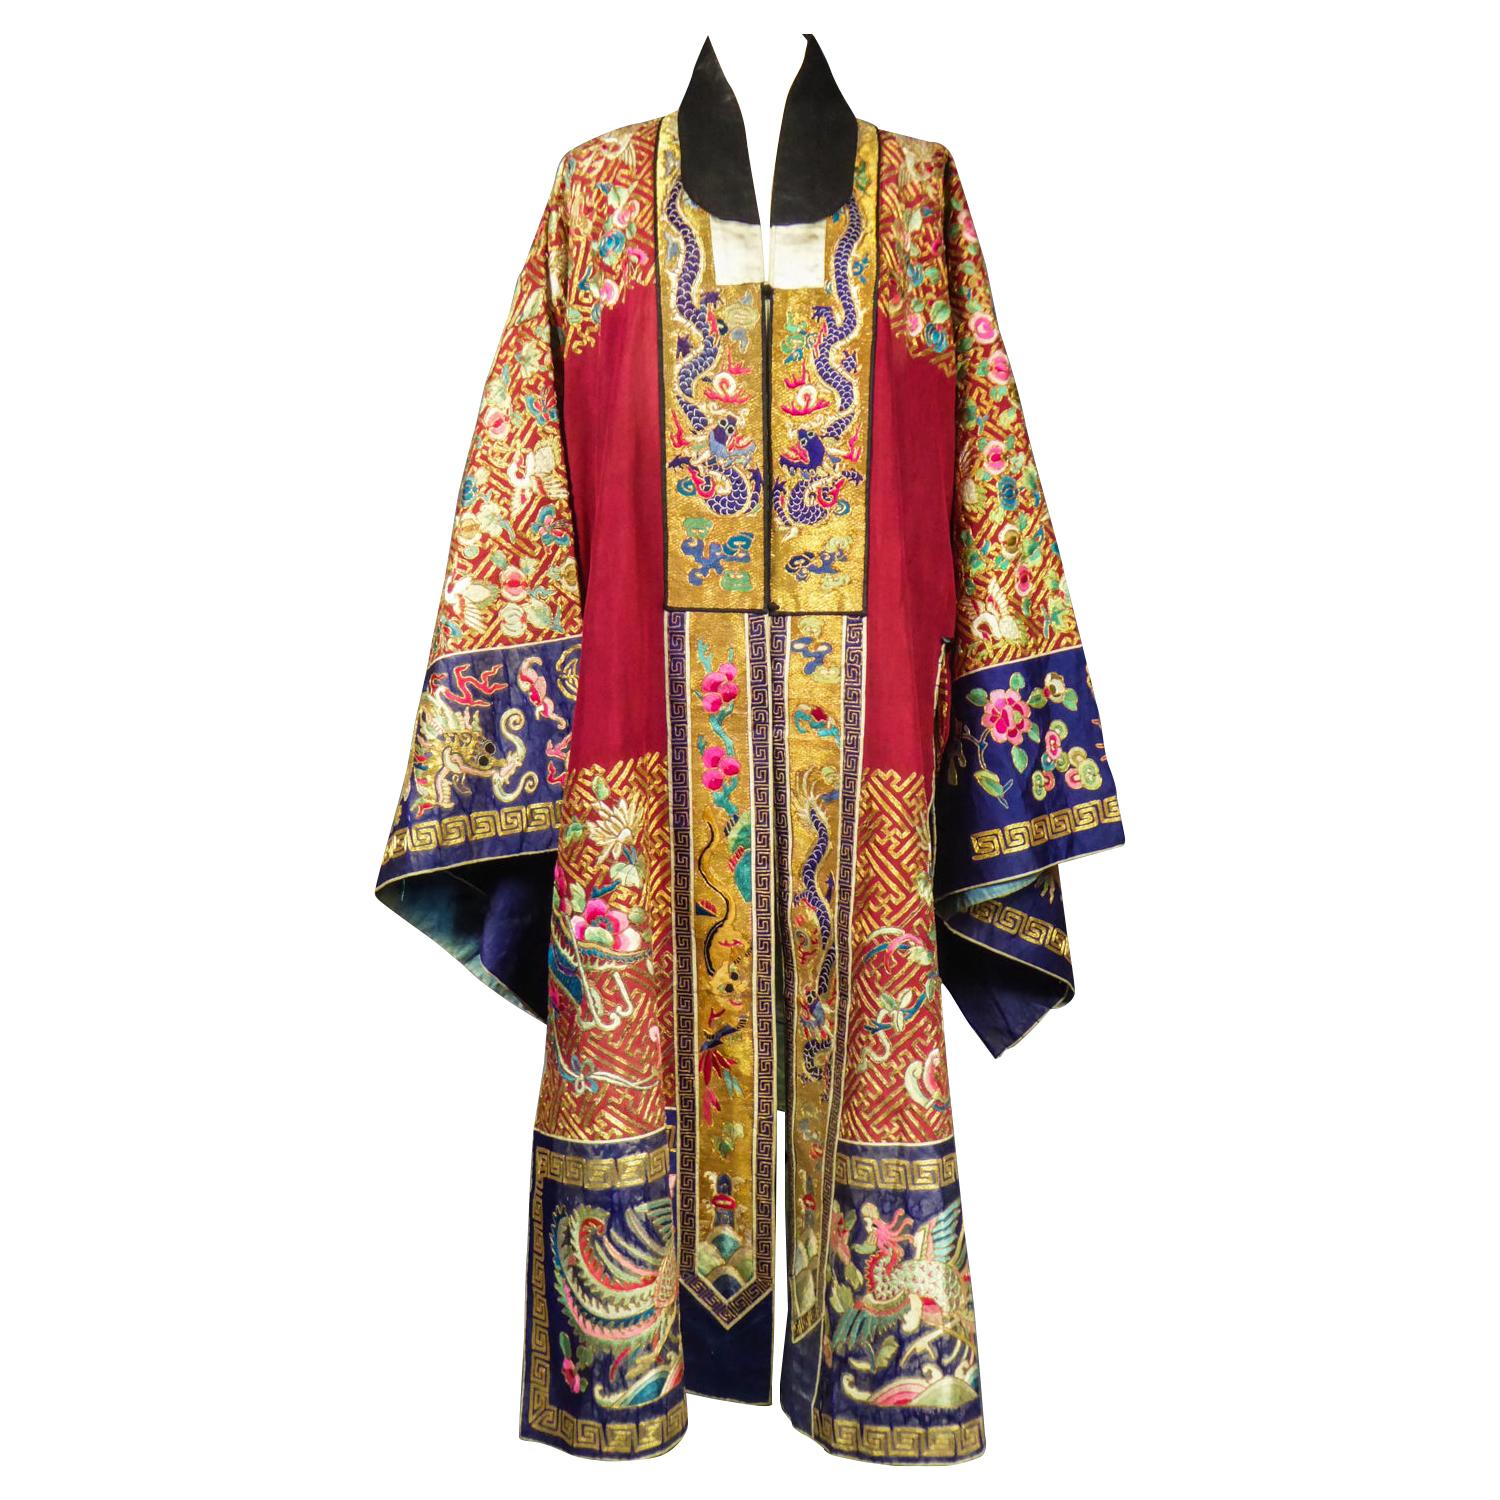 Taoist Chinese Ceremonial Golden Embroidered Coat - China Winter 1874